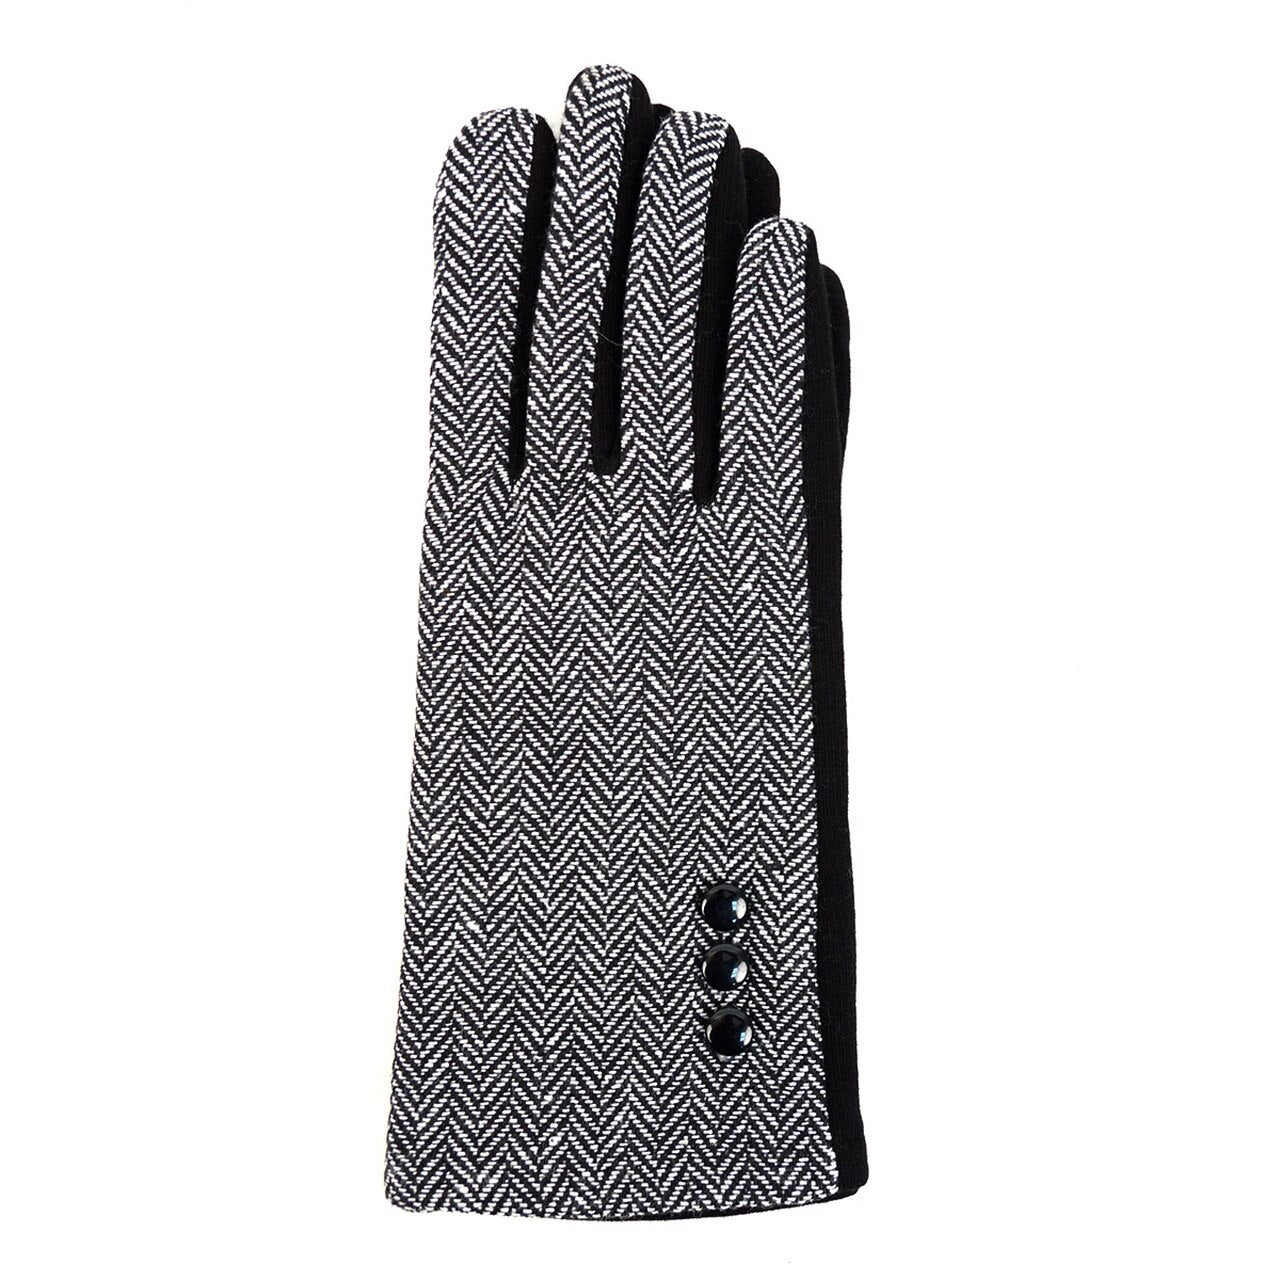 Herringbone Touch Screen Women's Gloves | Glamorous Retro Styling with 3-Button Accent